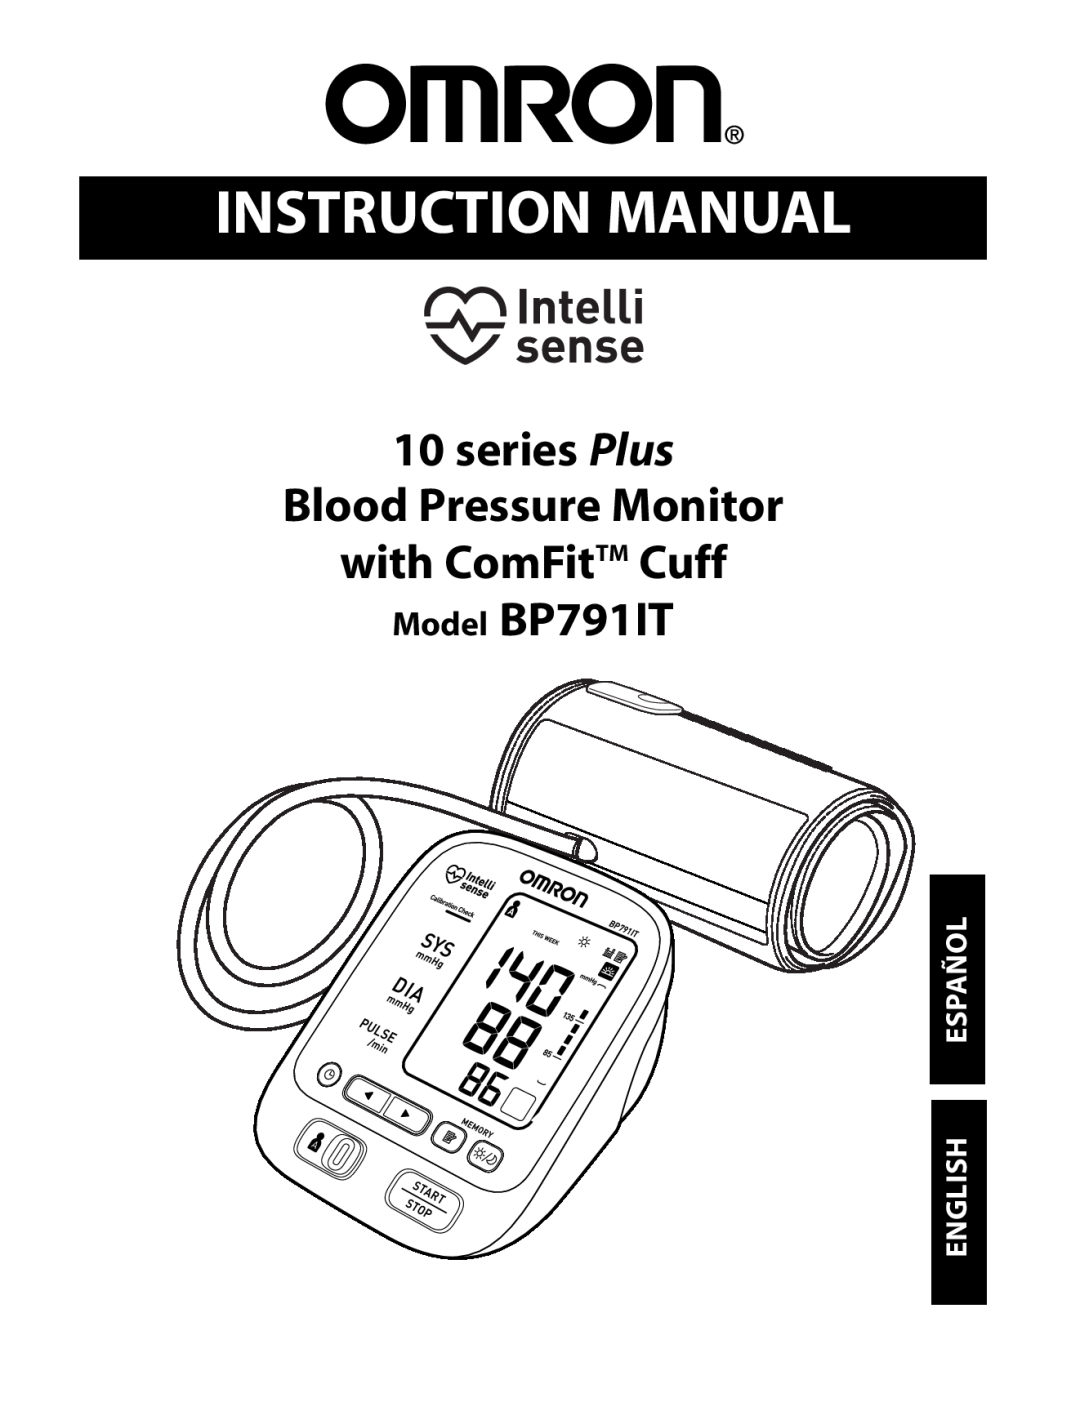 Omron Healthcare instruction manual series Plus Blood Pressure Monitor with ComFitTM Cuff, Model BP791IT 